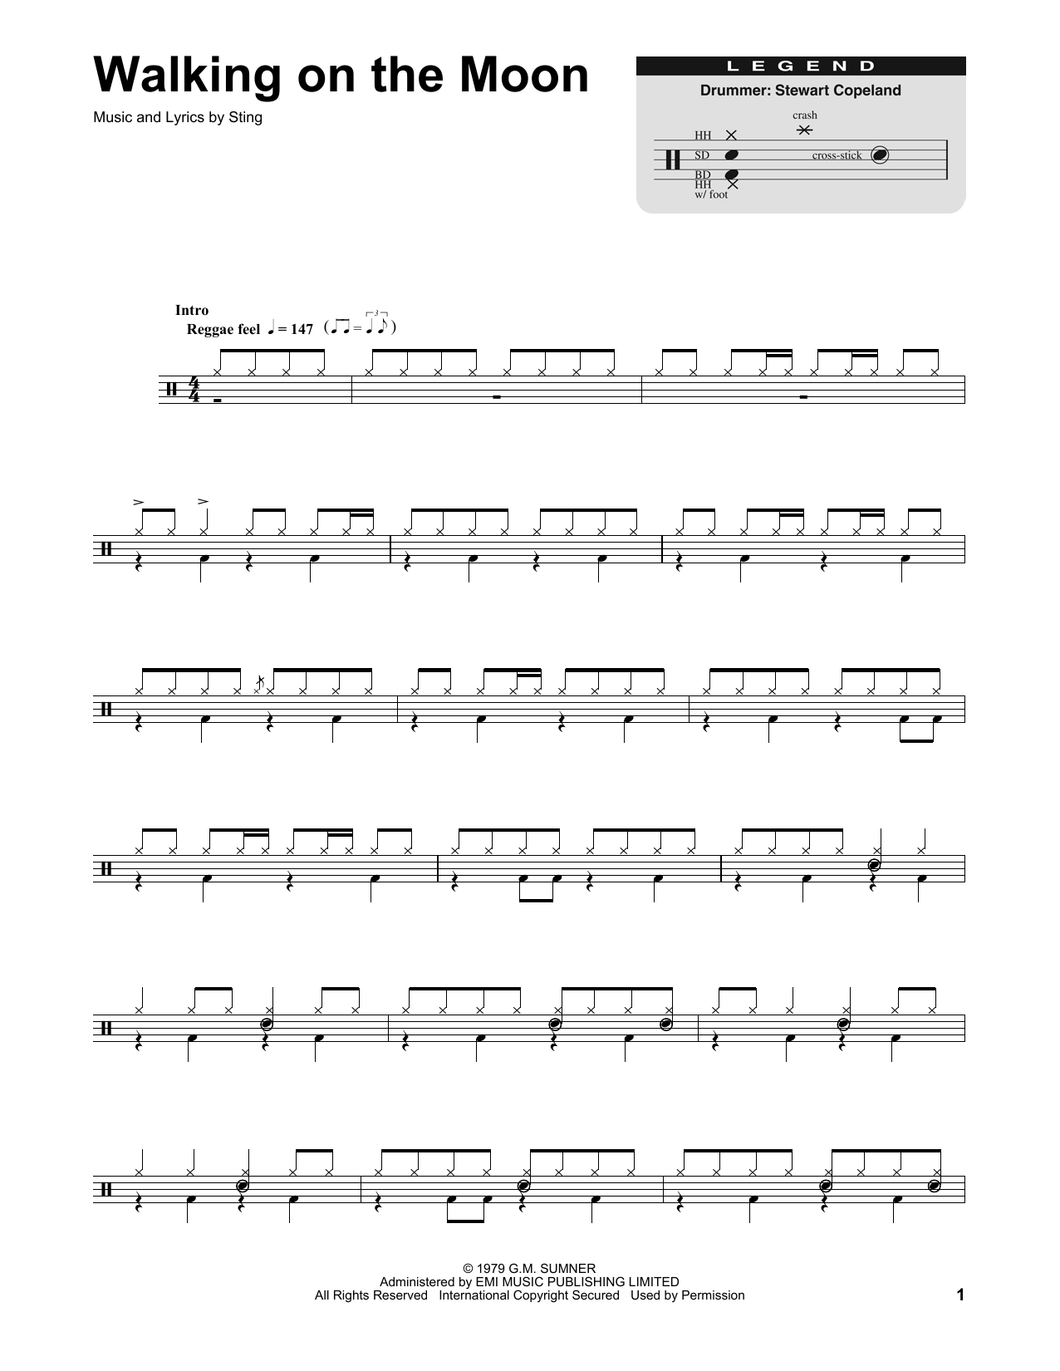 Walking on the Moon - The Police - Full Drum Transcription / Drum Sheet Music - SheetMusicDirect DT